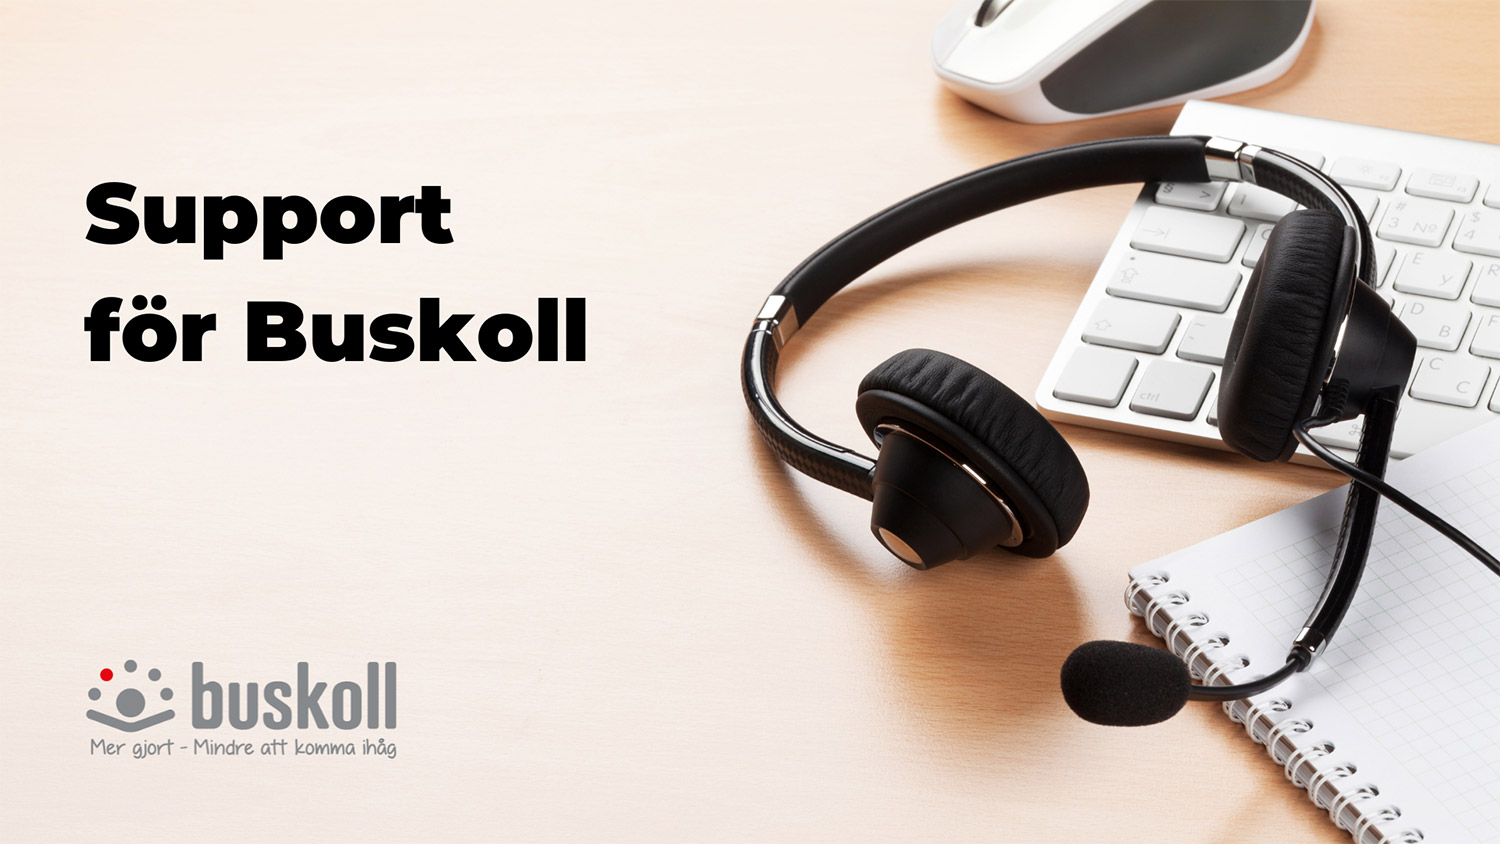 Support for Buskoll